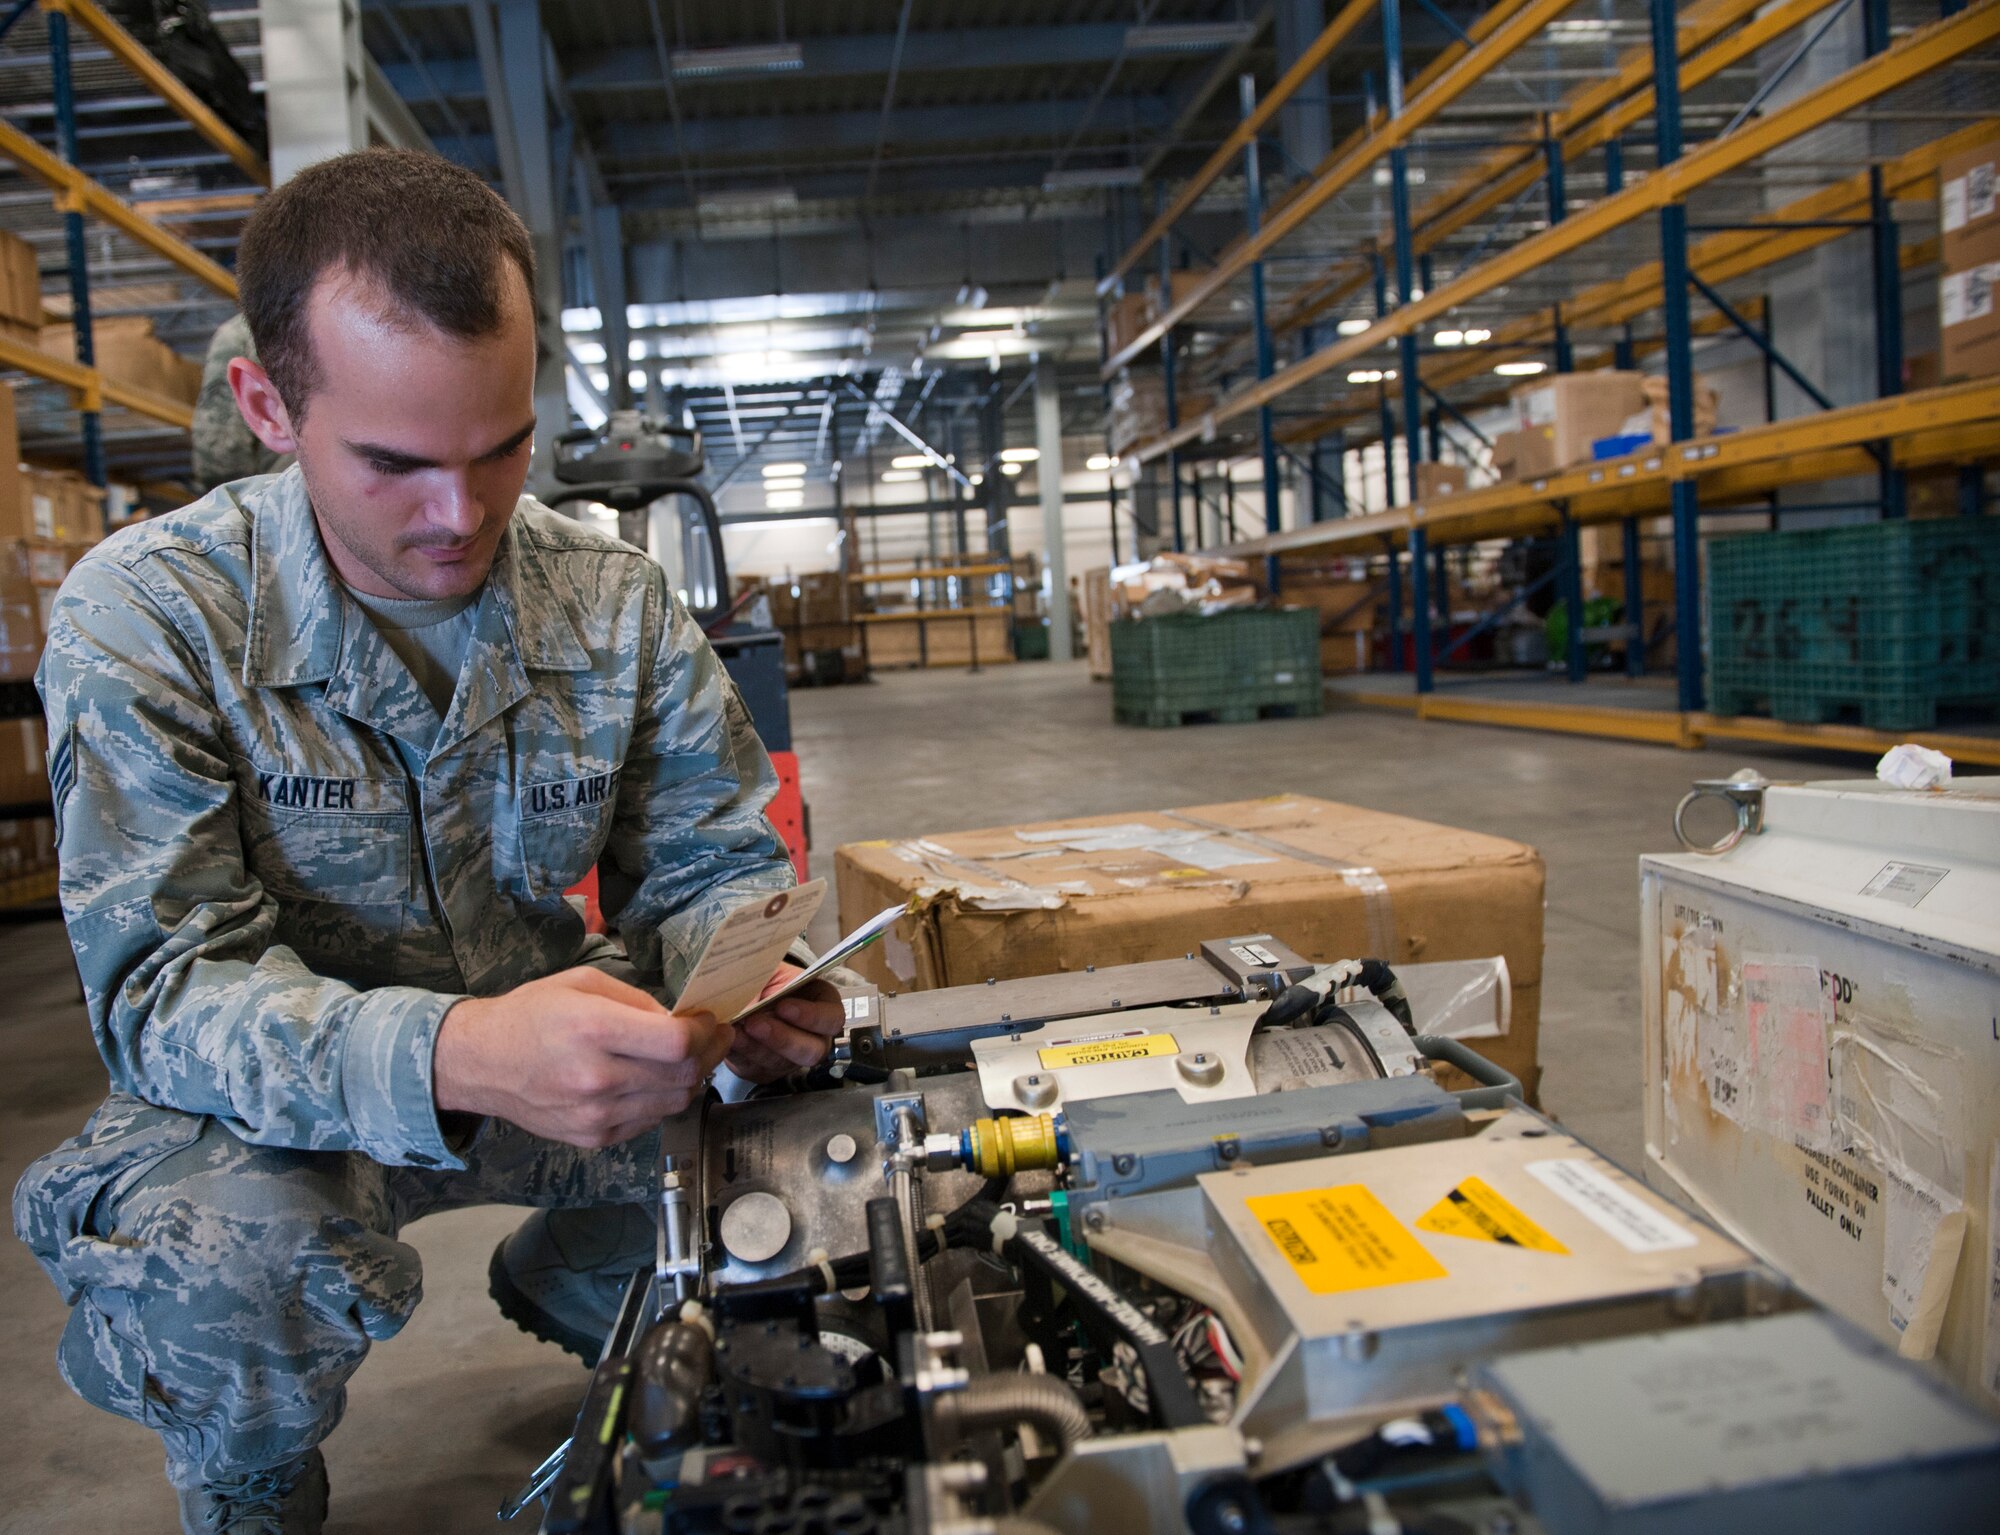 Senior Airman Andrew Kanter, 1st Special Operations Logistic Readiness Squadron supply journeyman, checks a packaging label on a radar transmitter at Hurlburt Field, Fla., Aug. 22, 2014. Verifying label information is important to ensure that products are sent to the correct places. (U.S. Air Force photo/Senior Airman Krystal M. Garrett)   